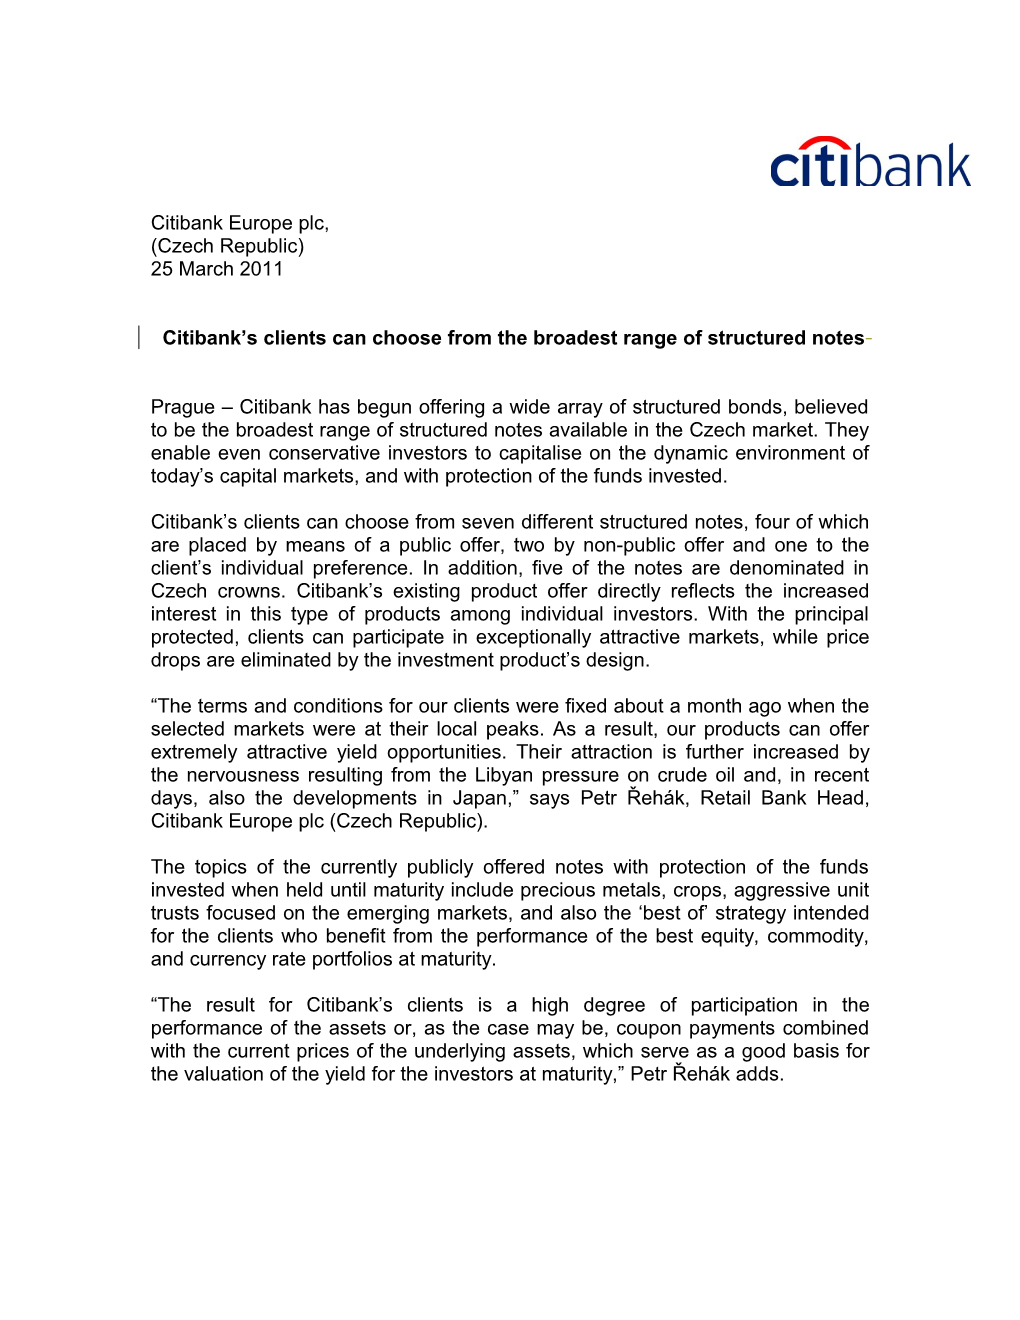 Citibank S Clients Can Choose from the Broadest Range of Structured Notes